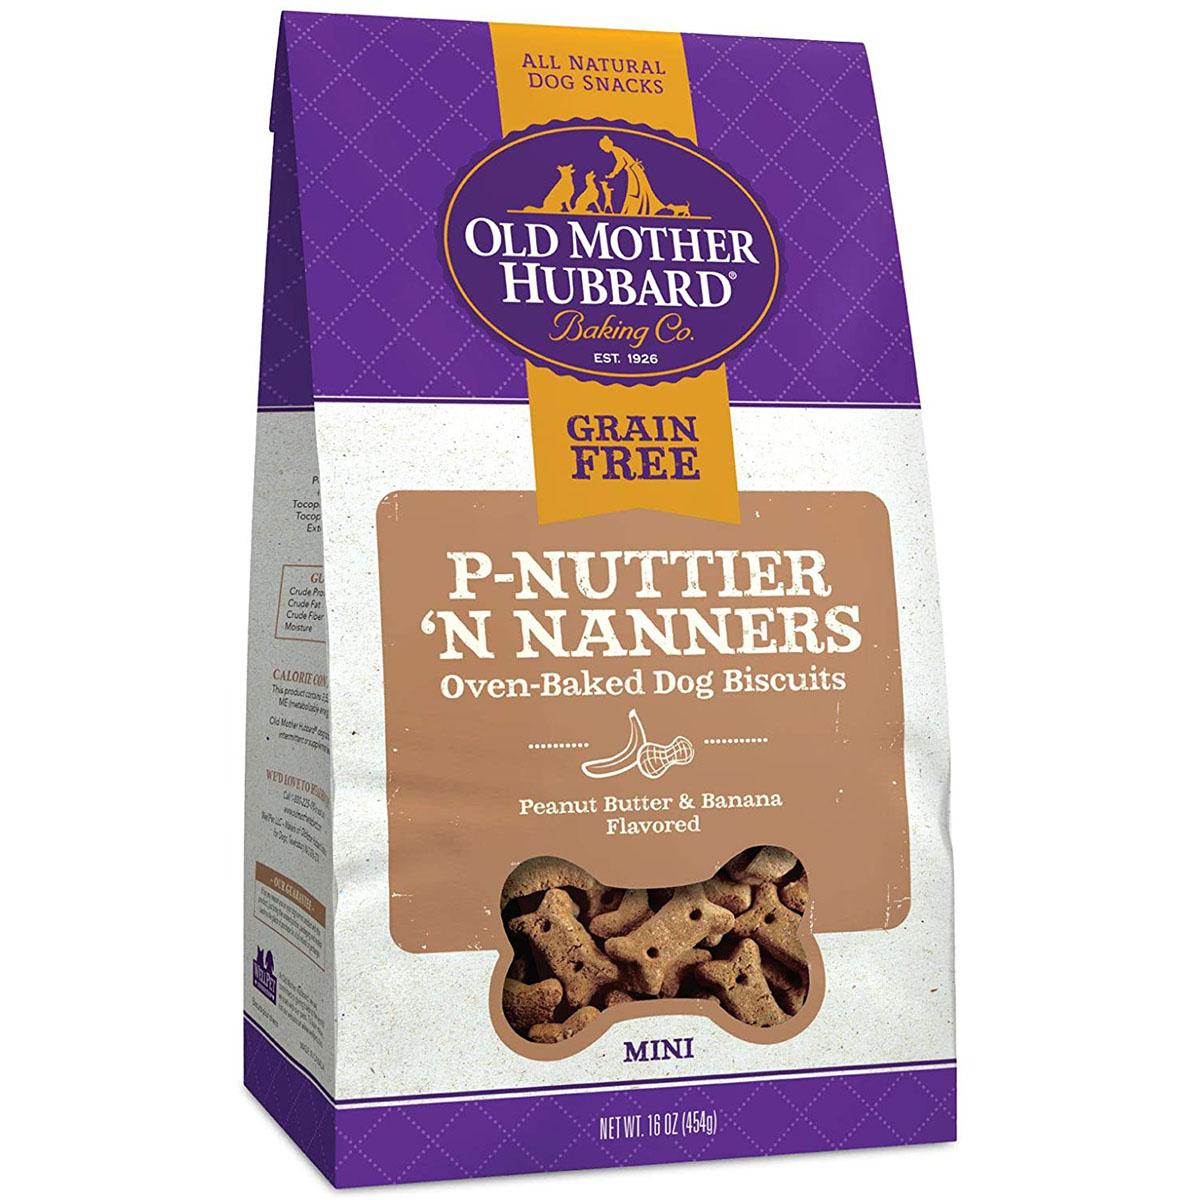 Old Mother Hubbard Mini P-Nuttier 'N Nanners Grain-Free Biscuits Baked Dog Treats